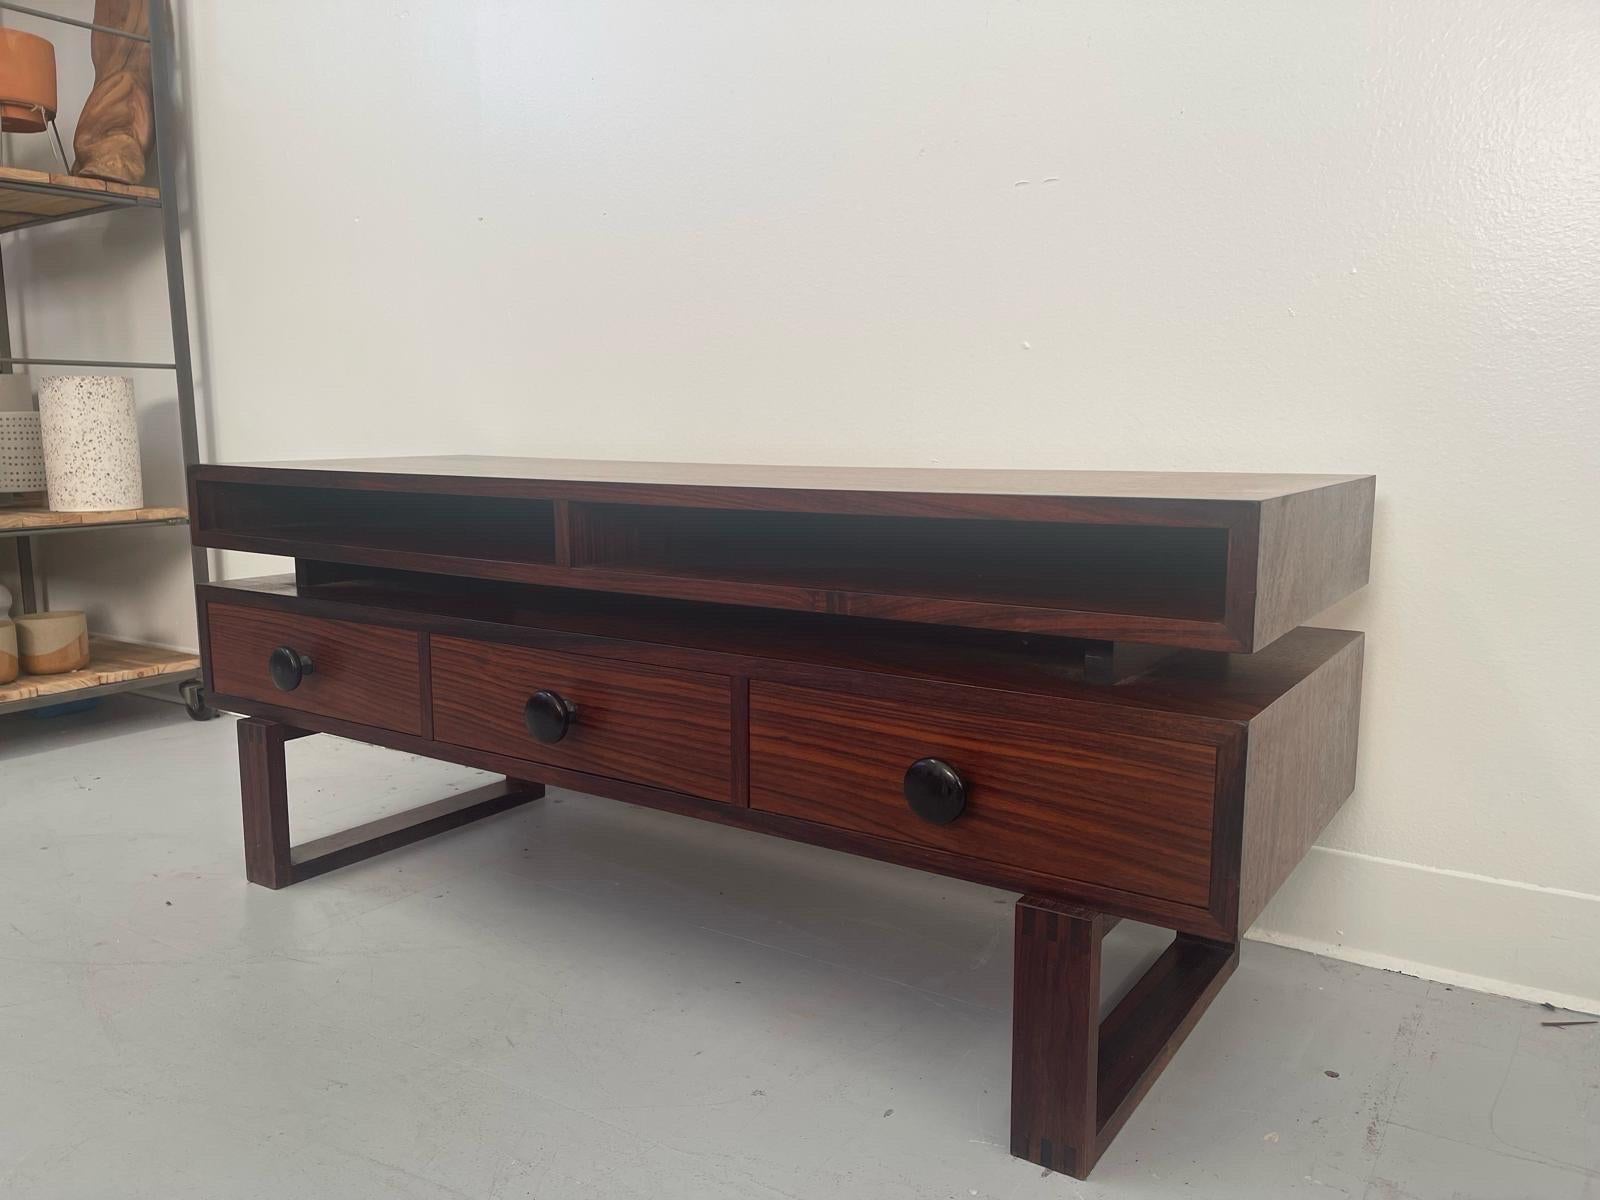 Danish design Coffee Table features wood Inlay accent on the top of the legs. Three dovetailed drawers. Top shelf is slightly elevated.Beautiful turned wood handles. Vintage Condition Consistent with Age as Pictured.

Dimensions. 42 W ; 15 D; 17 1/2